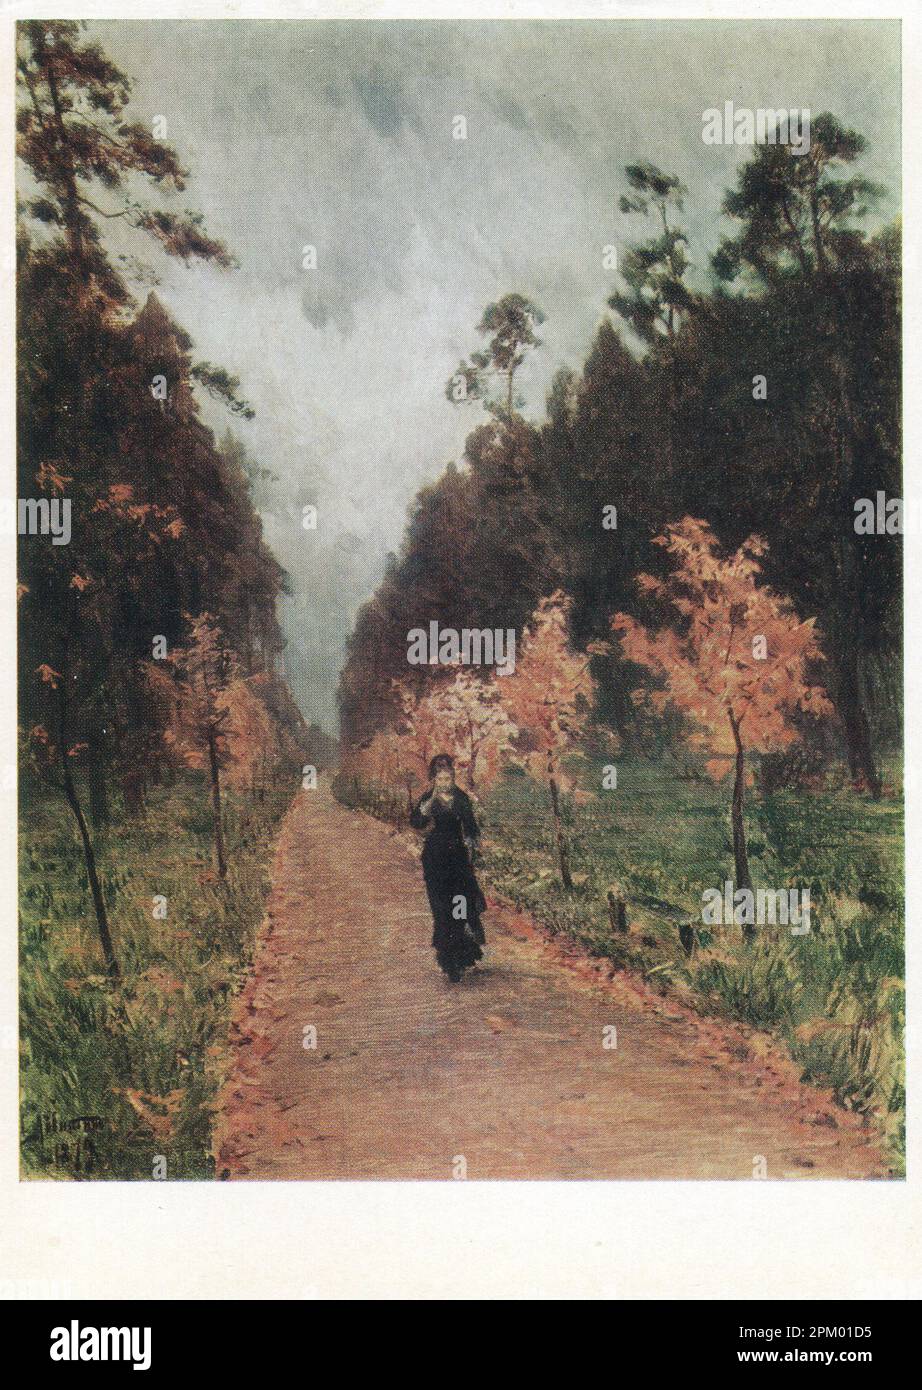 Old Vintage postcard of the USSR, 1971. 'Autumn day. Sokolniki Park.' by Isaac Ilyich Levitan (Russian: Исаак Ильич Левитан; 30 August [O.S. 18 August] 1860 – 4 August [O.S. 22 July] 1900) was a classical Russian landscape painter who advanced the genre of the 'mood landscape'. Stock Photo